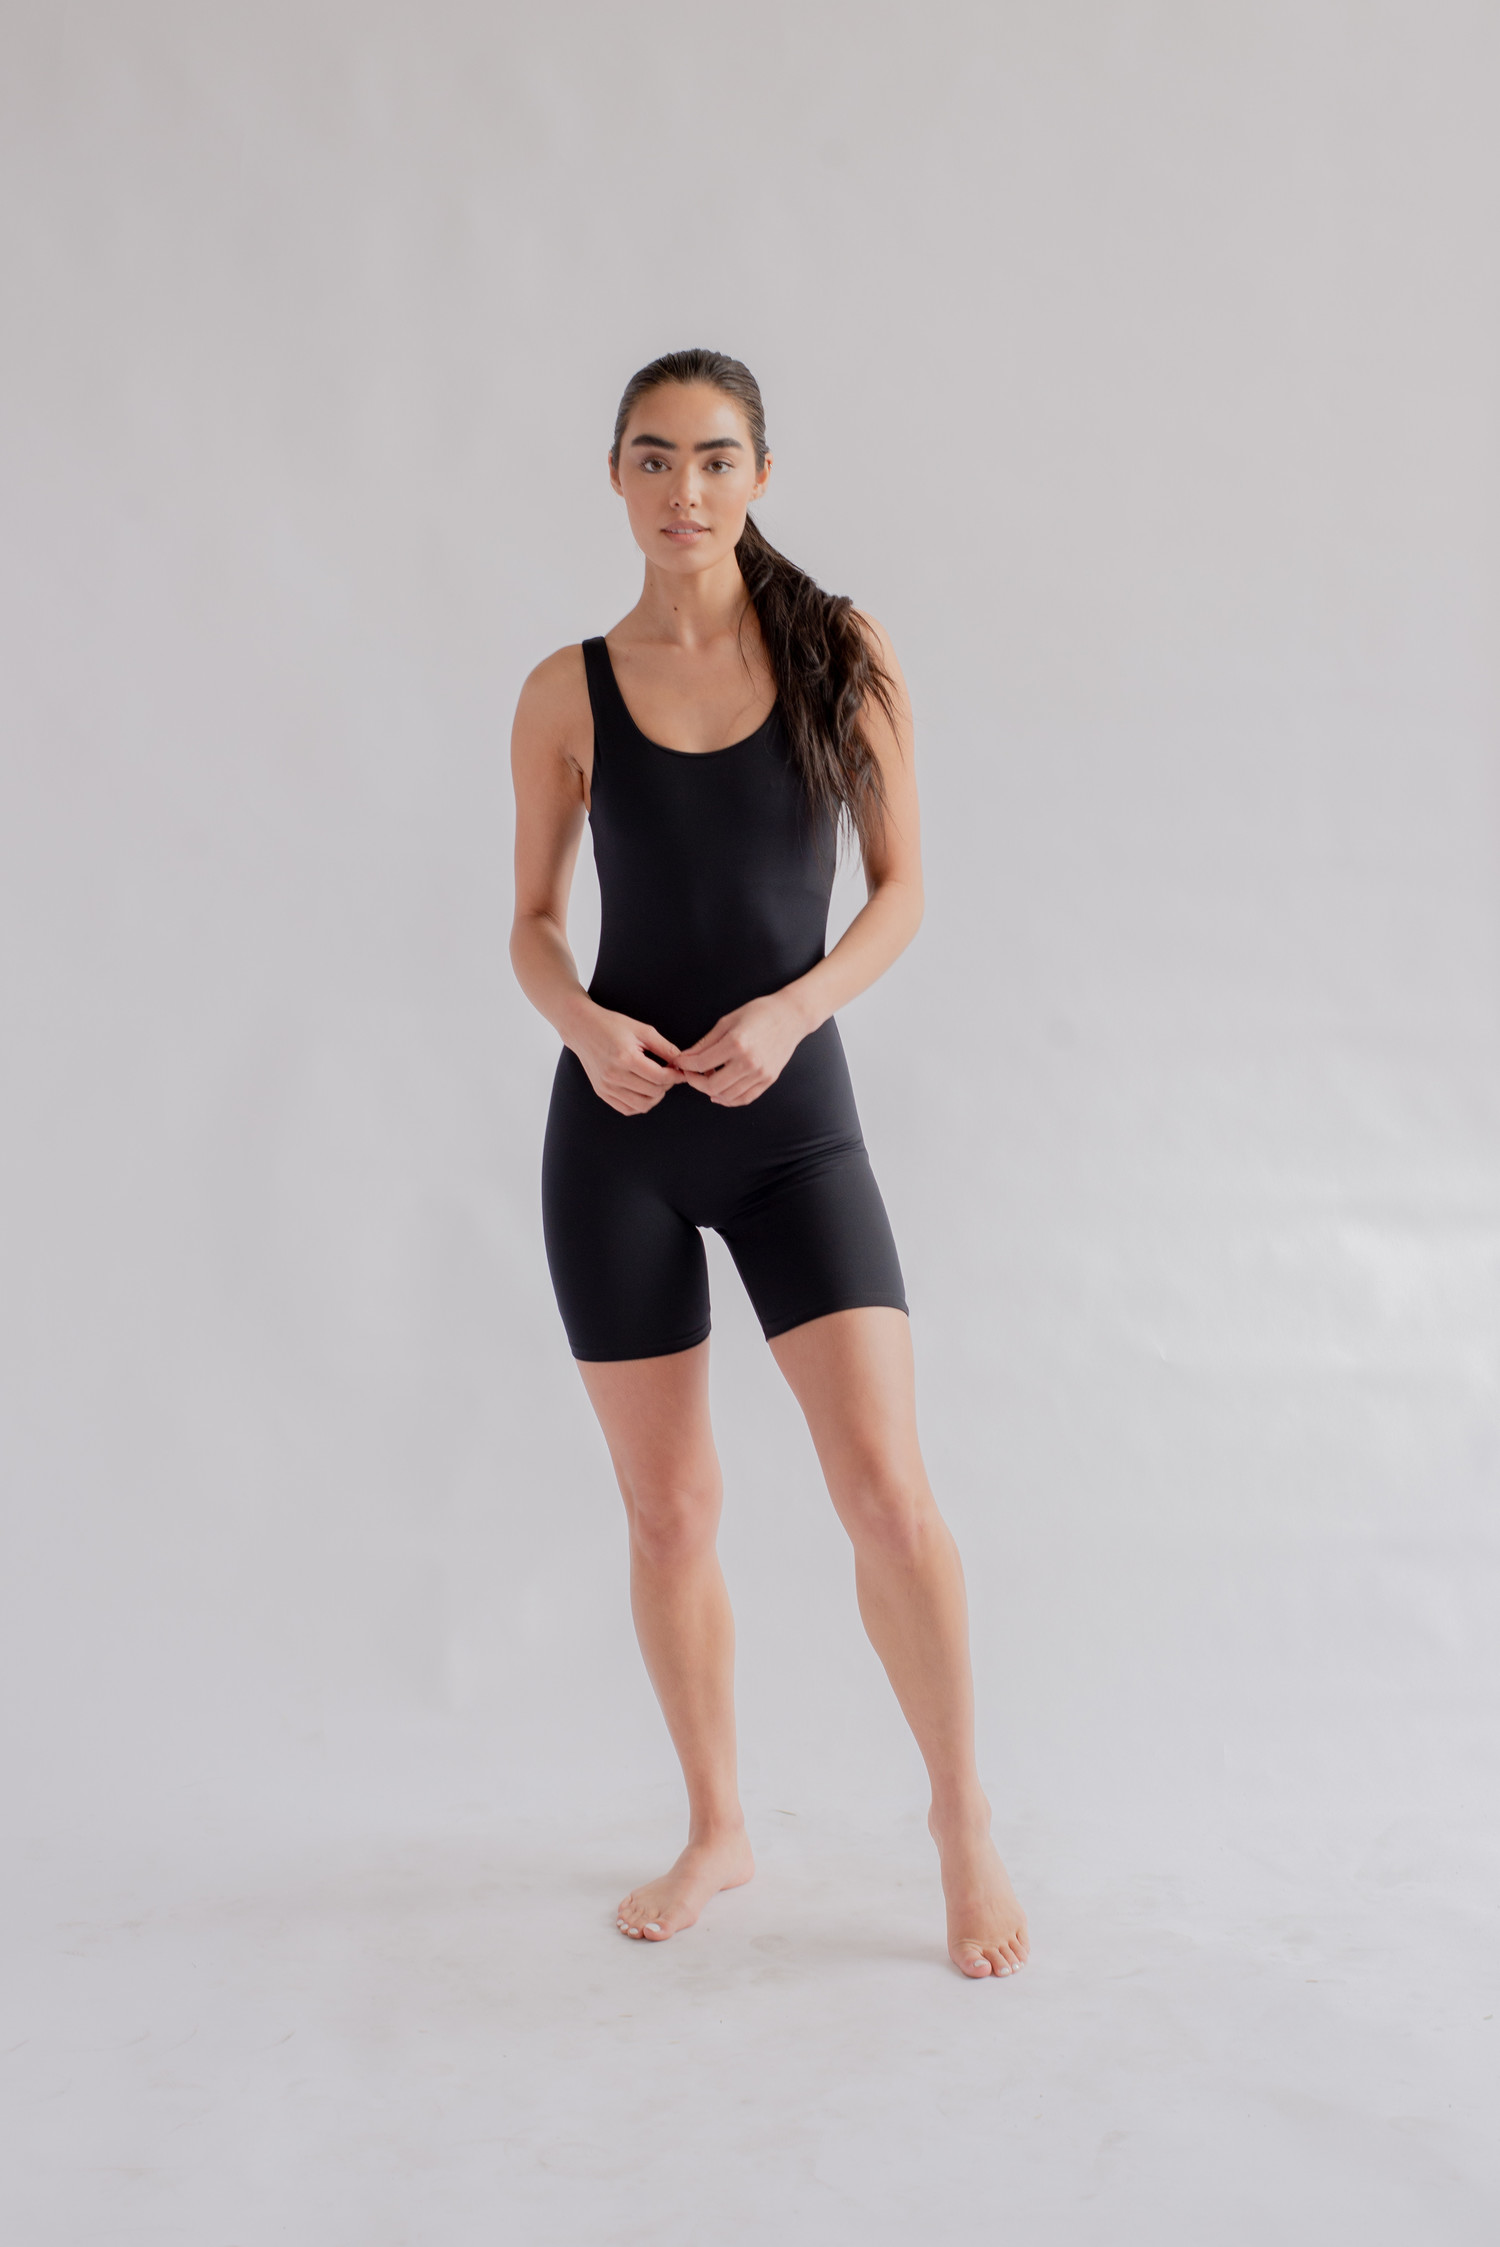 GIRLFRIEND COLLECTIVE Scoop Back Cycling Short Bodysuit in Black